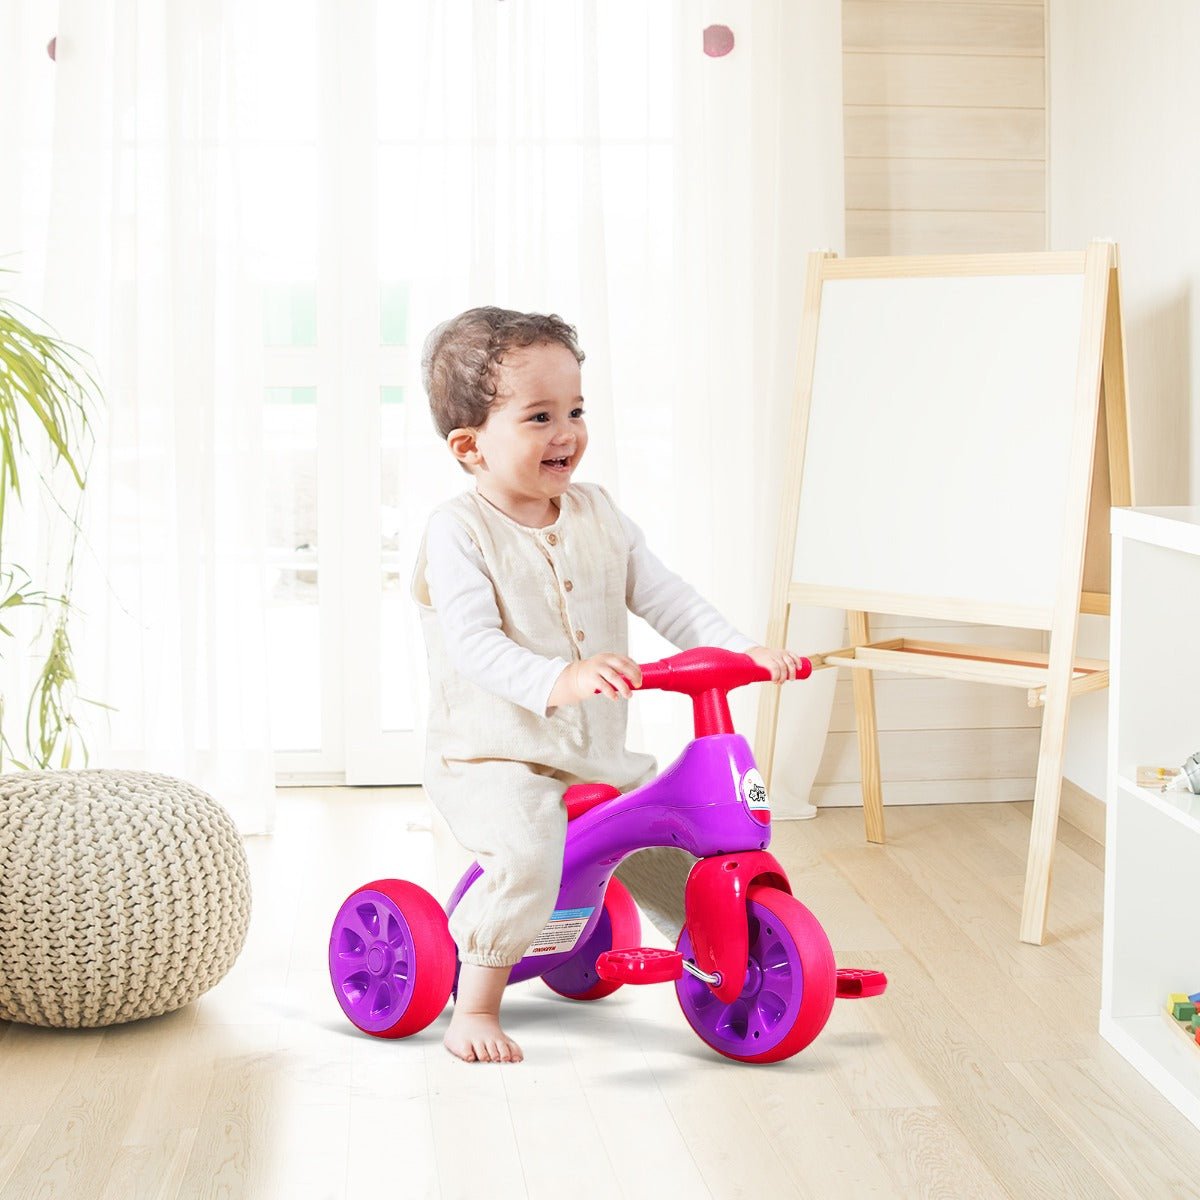 Little Rider's Delight: Pink Tricycle with Foot Pedals for Toddlers